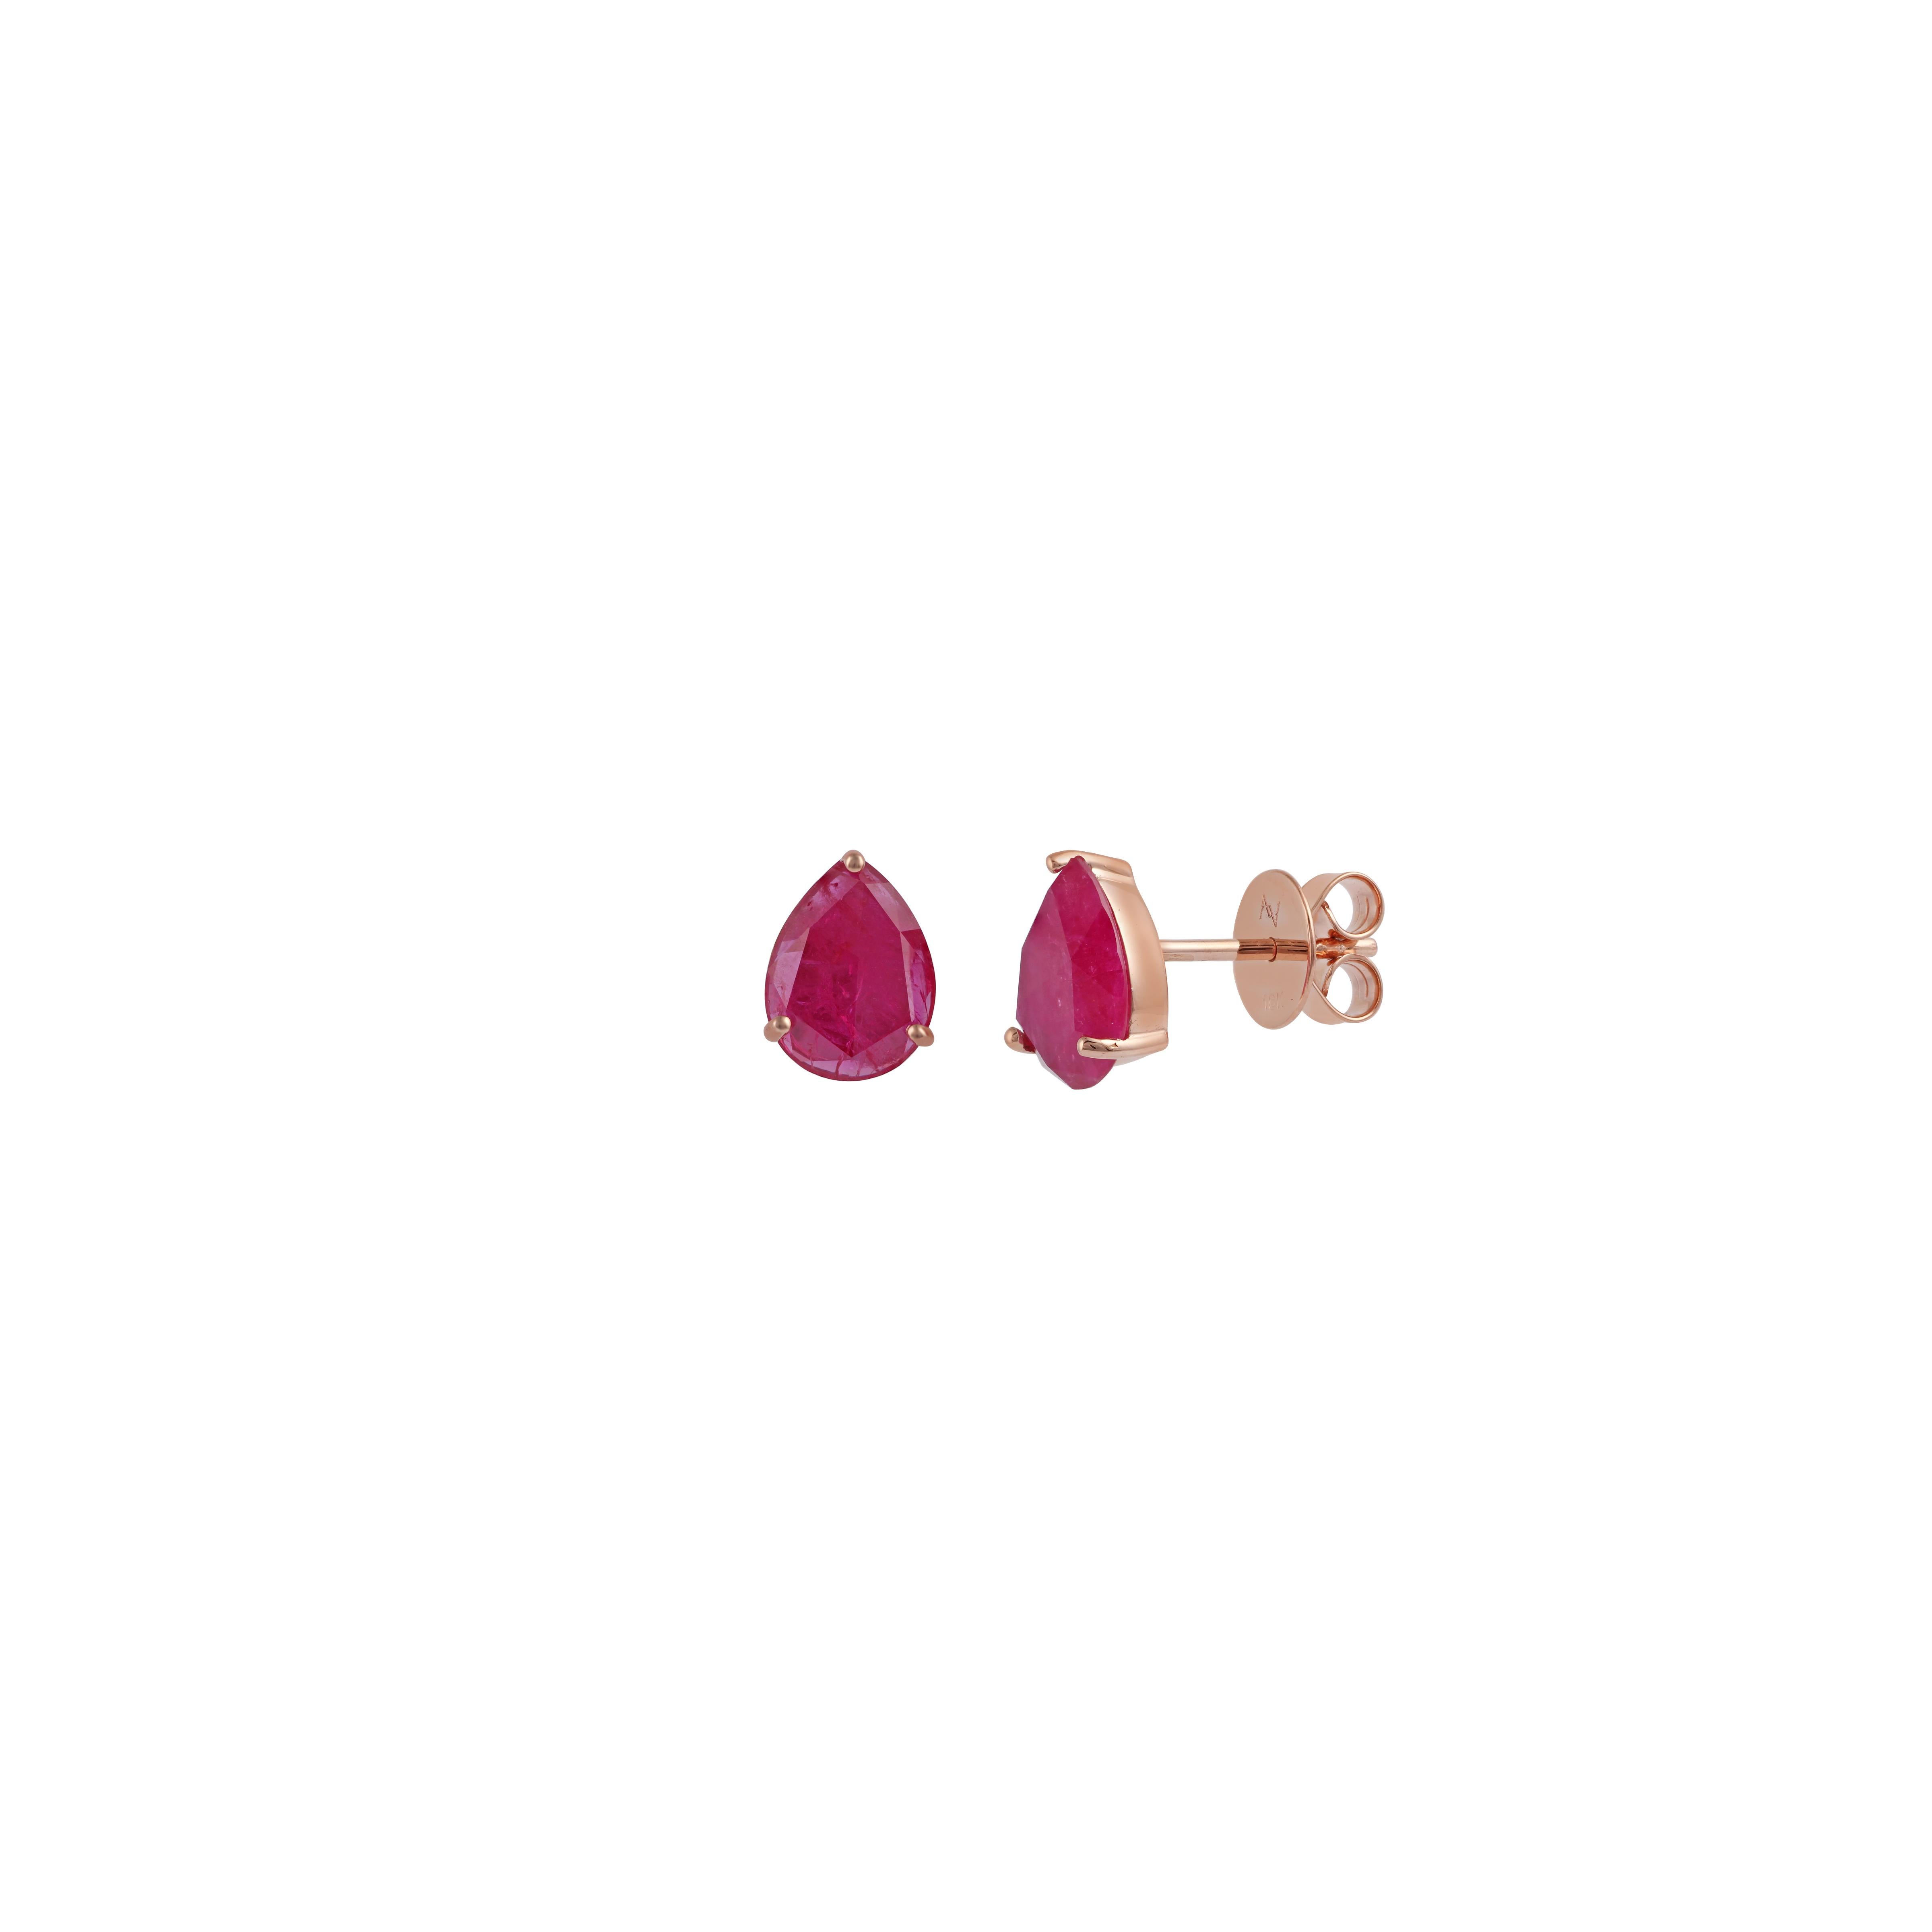 Contemporary 3.13 Carat Mozambique Ruby Stud Earrings in 18k Rose Gold For Sale